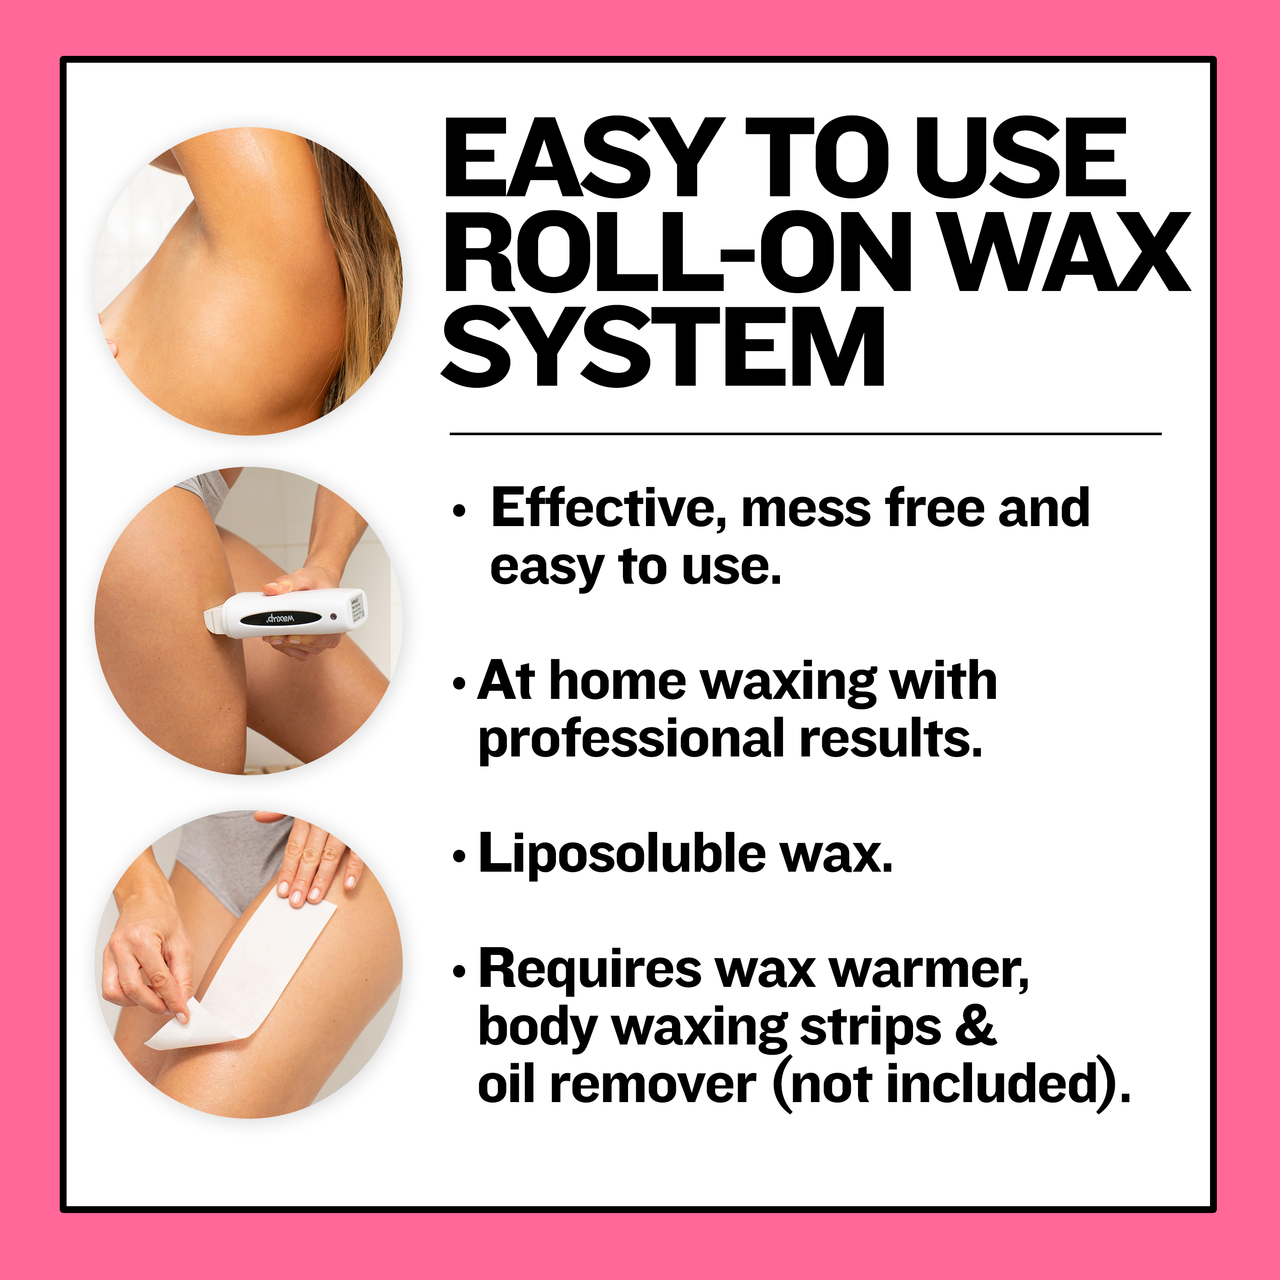 Rose Roll On Wax Cartridges 2 Pack - thatswaxup -  - Roll On Wax - waxup hair removal wax body waxing kit women and men professional waxing supplies